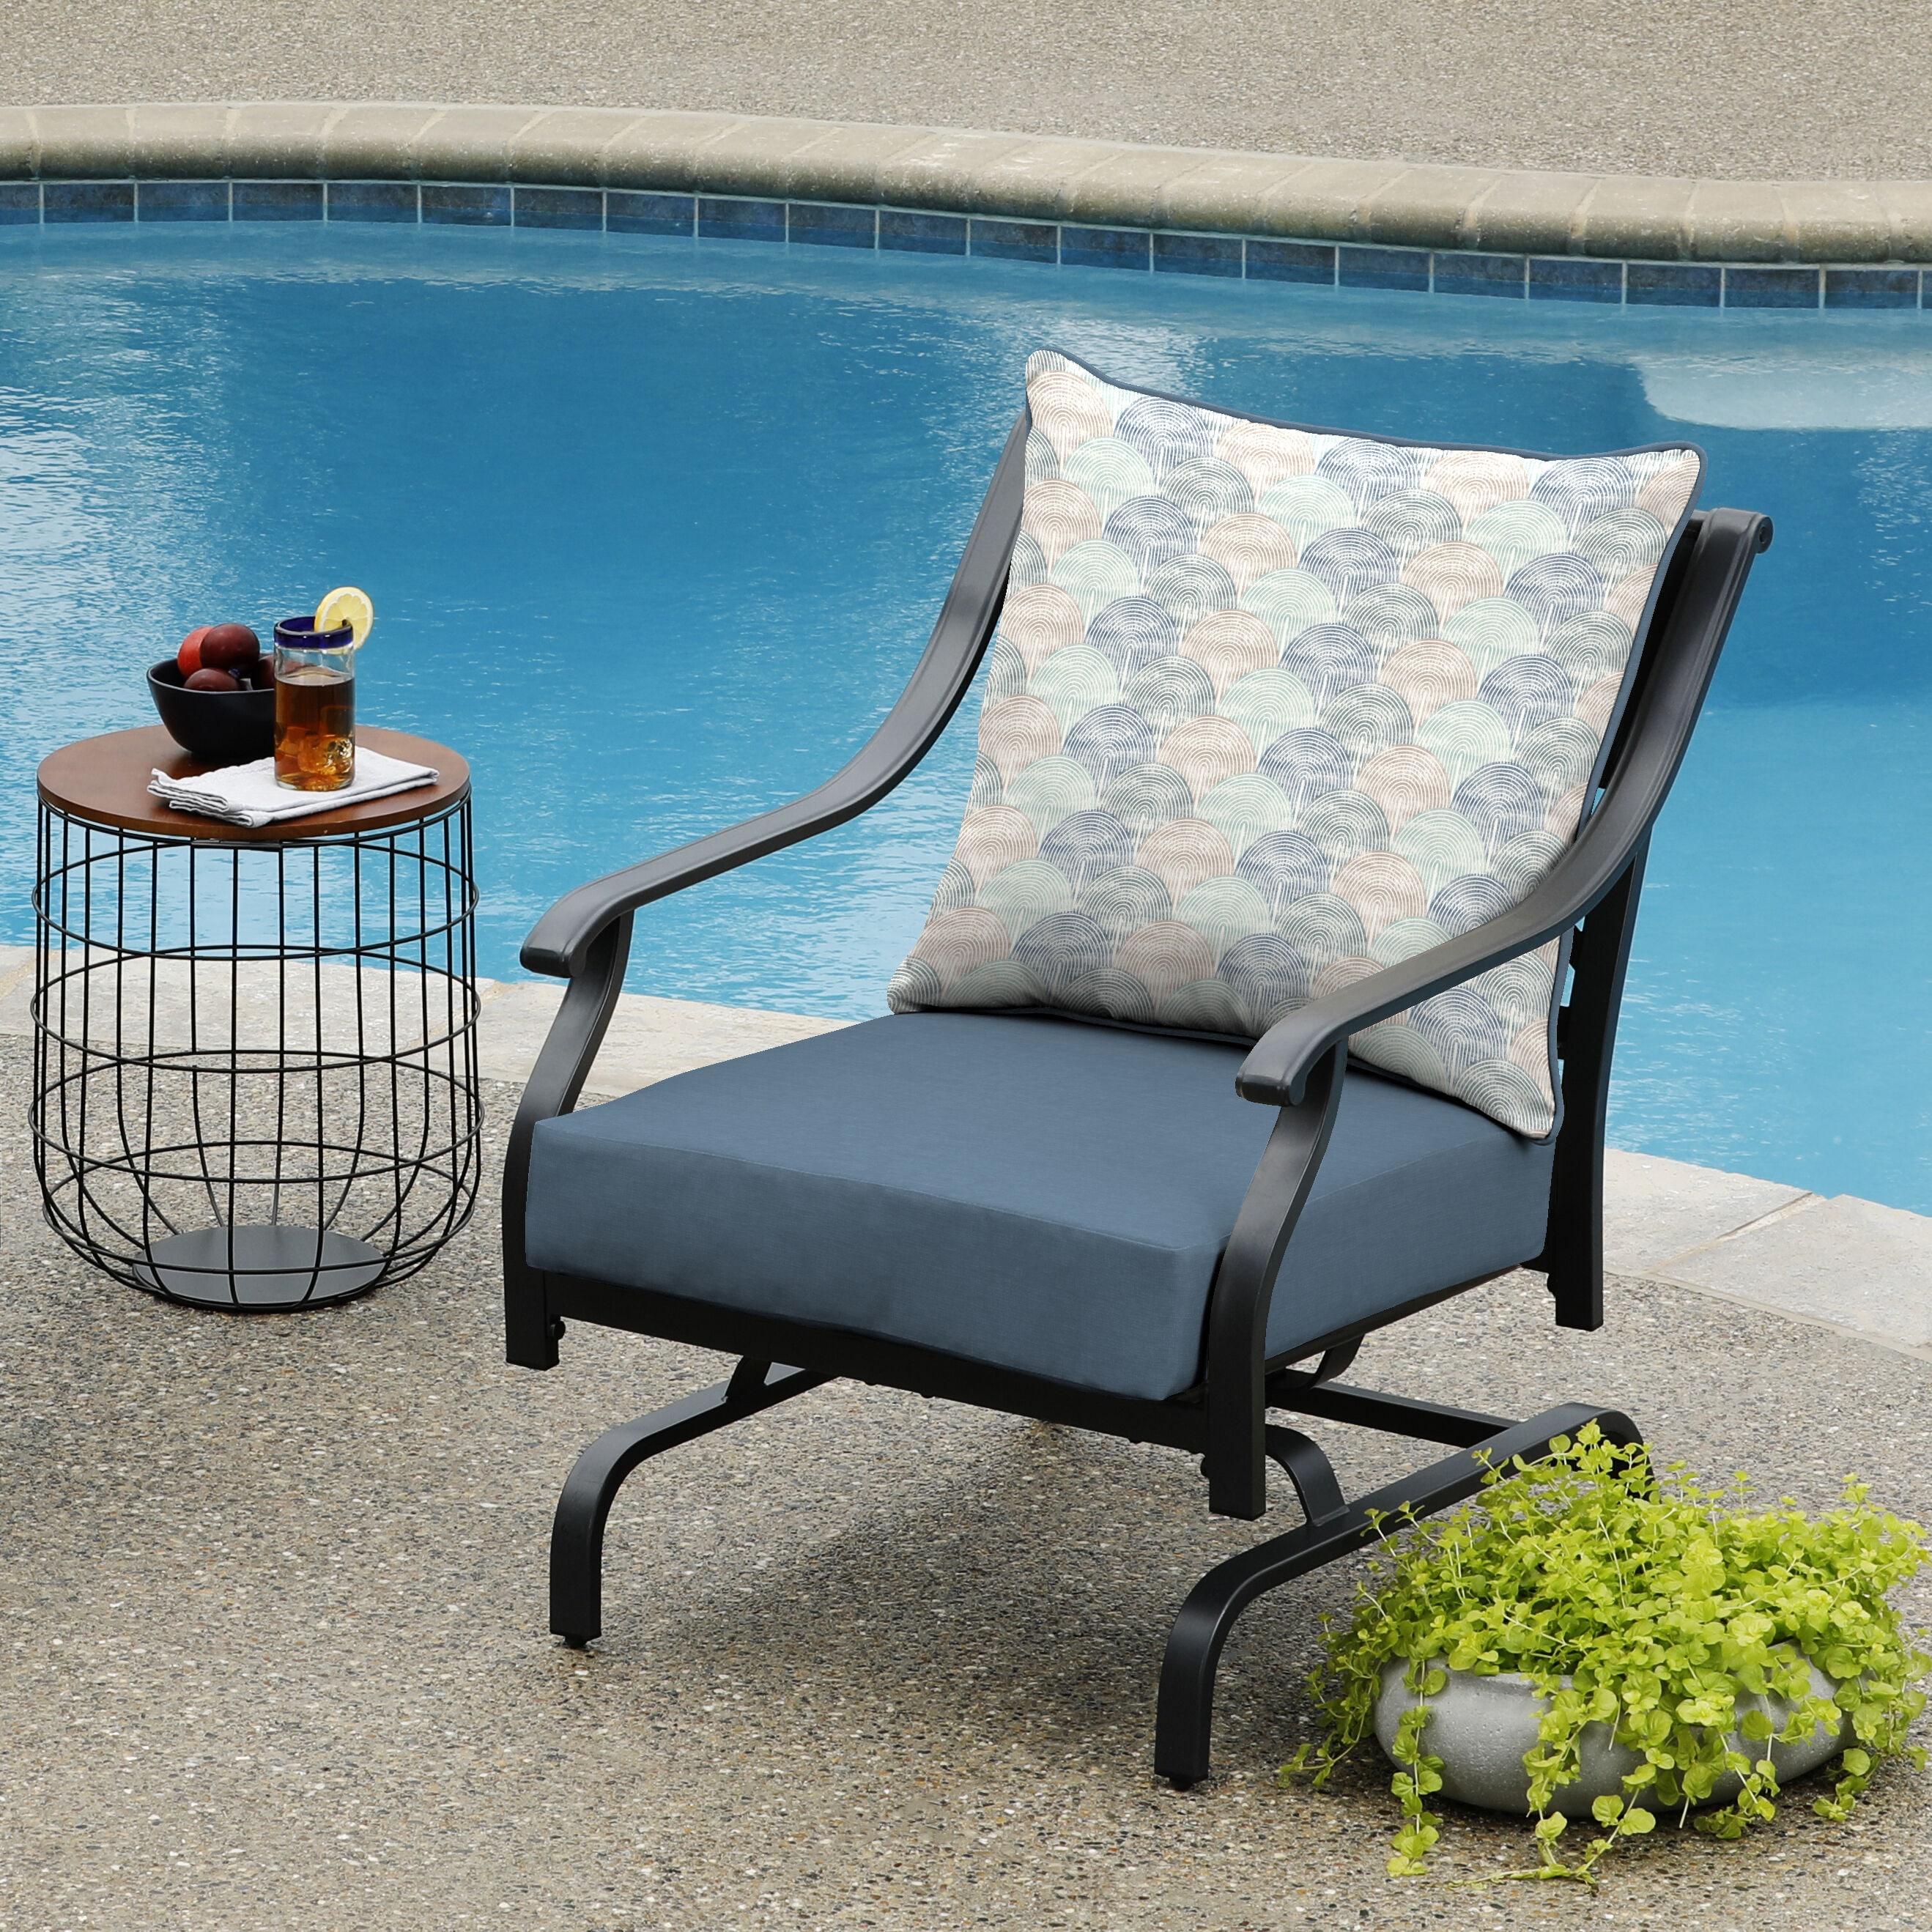 Origin 21 24-in x 24-in Ogee Texture Deep Seat Patio Chair Cushion in the  Patio Furniture Cushions department at